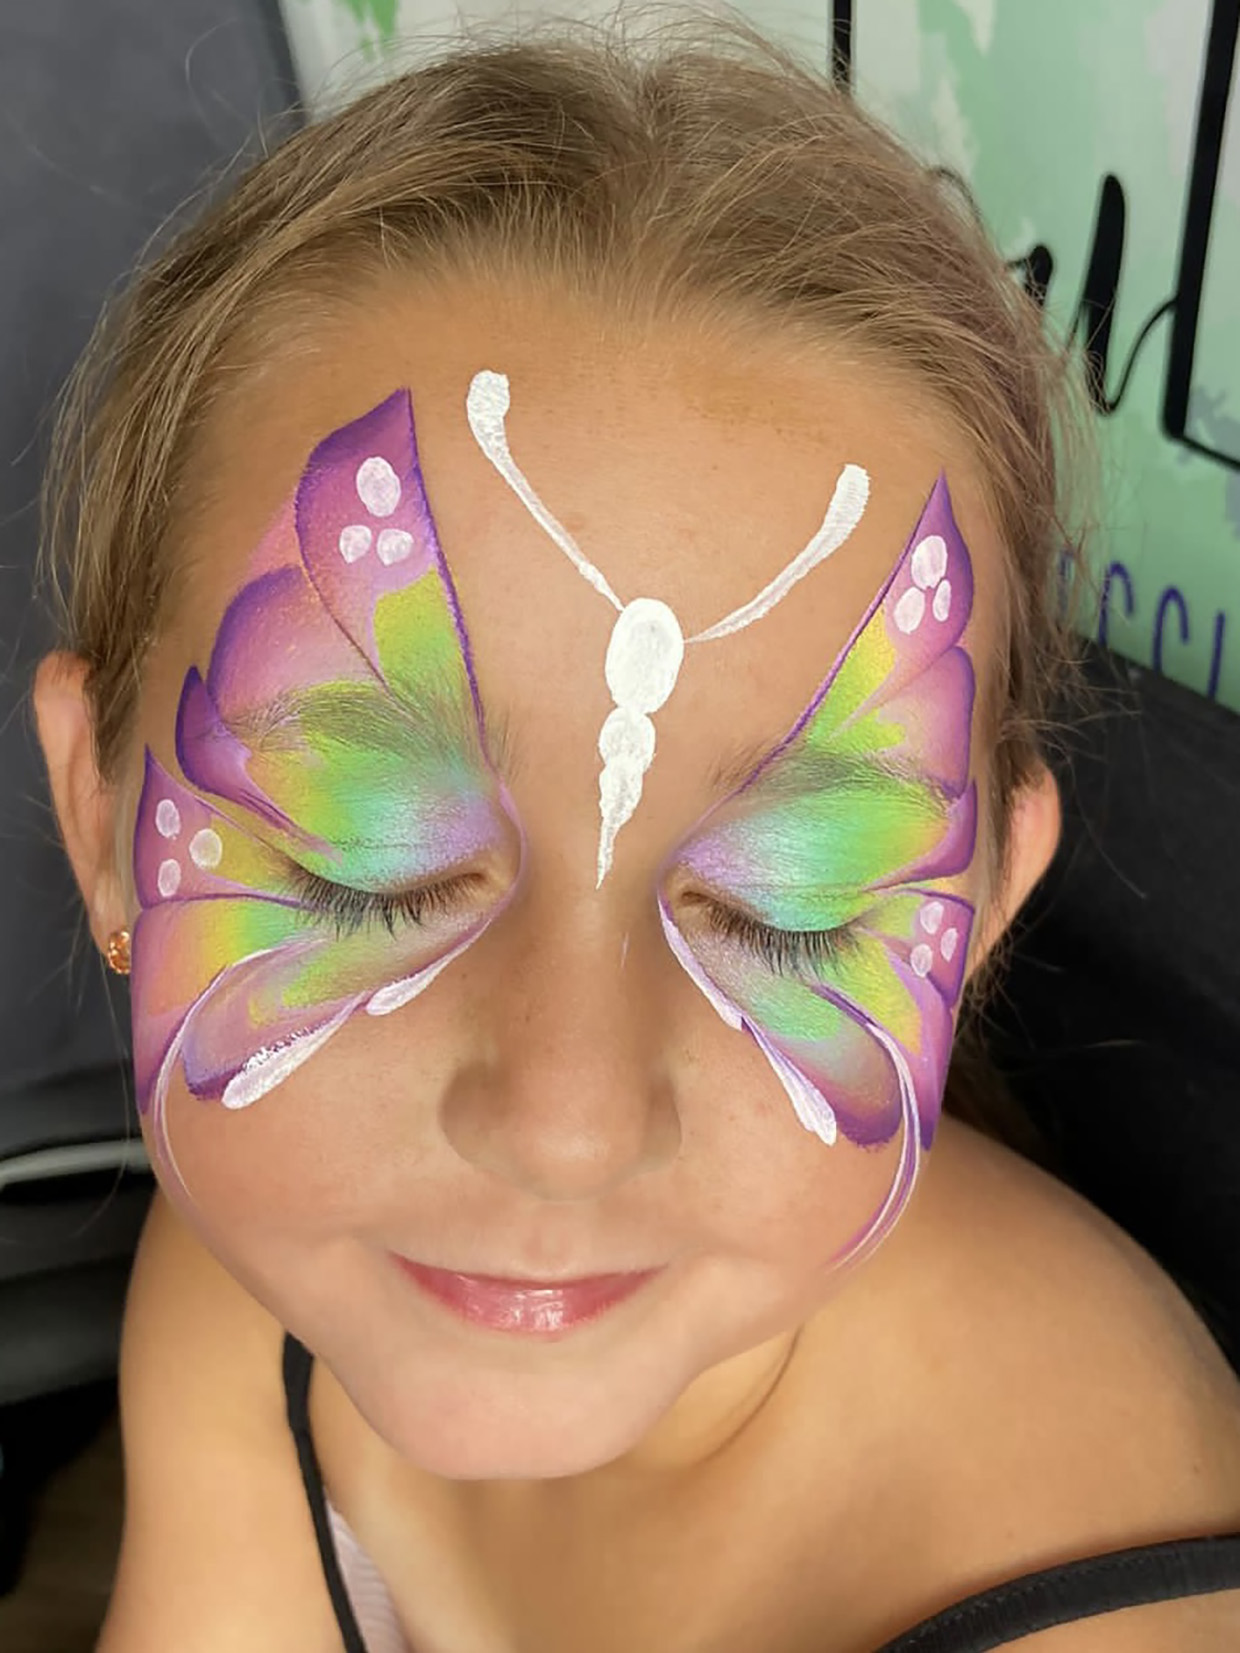 Butterfly face paint alternatives for boys – Atop Serenity Hill